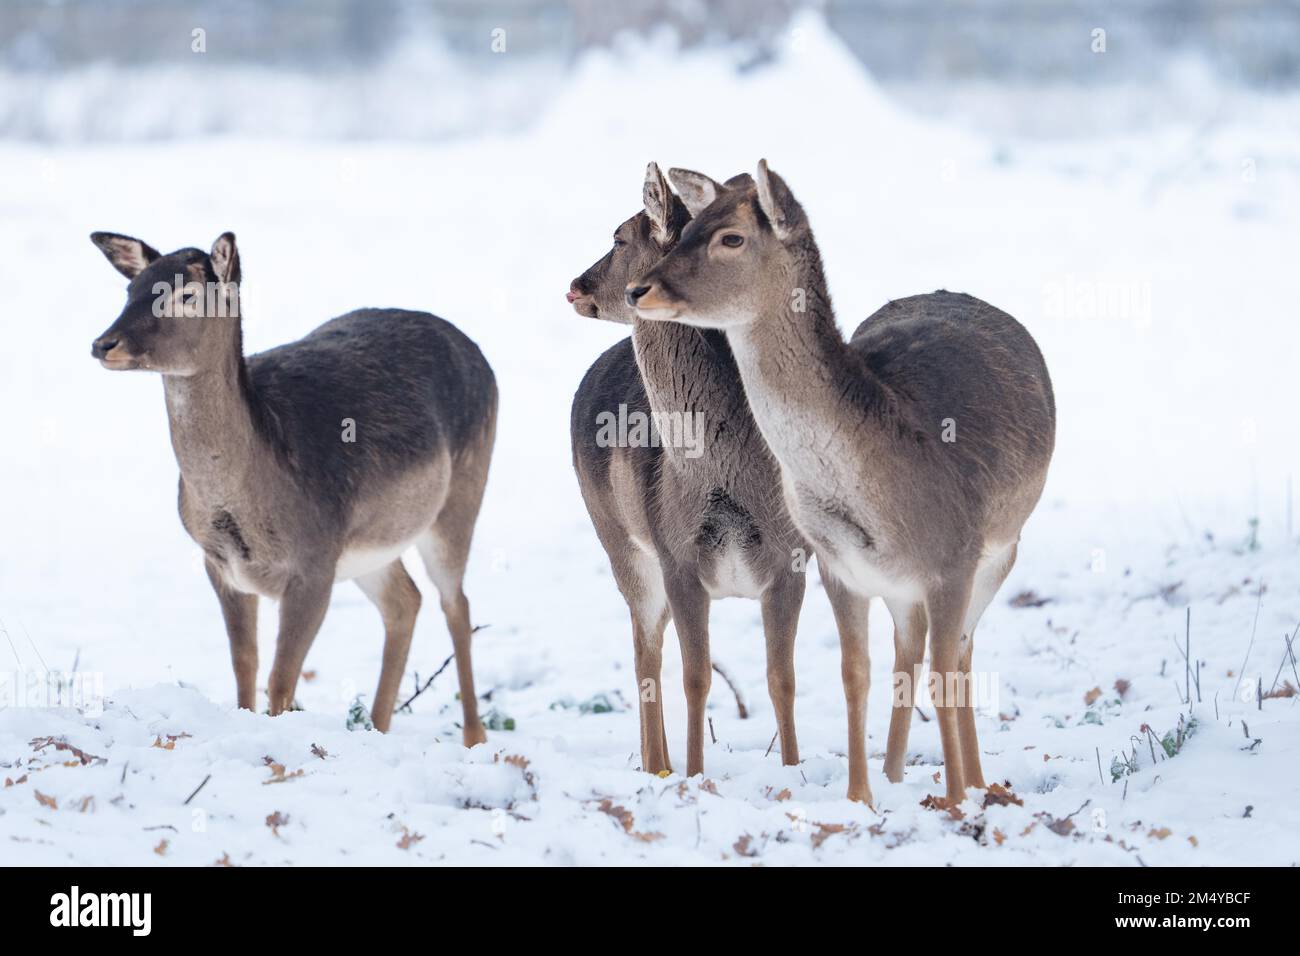 Deer in the snow, Black Forest, Germany Stock Photo